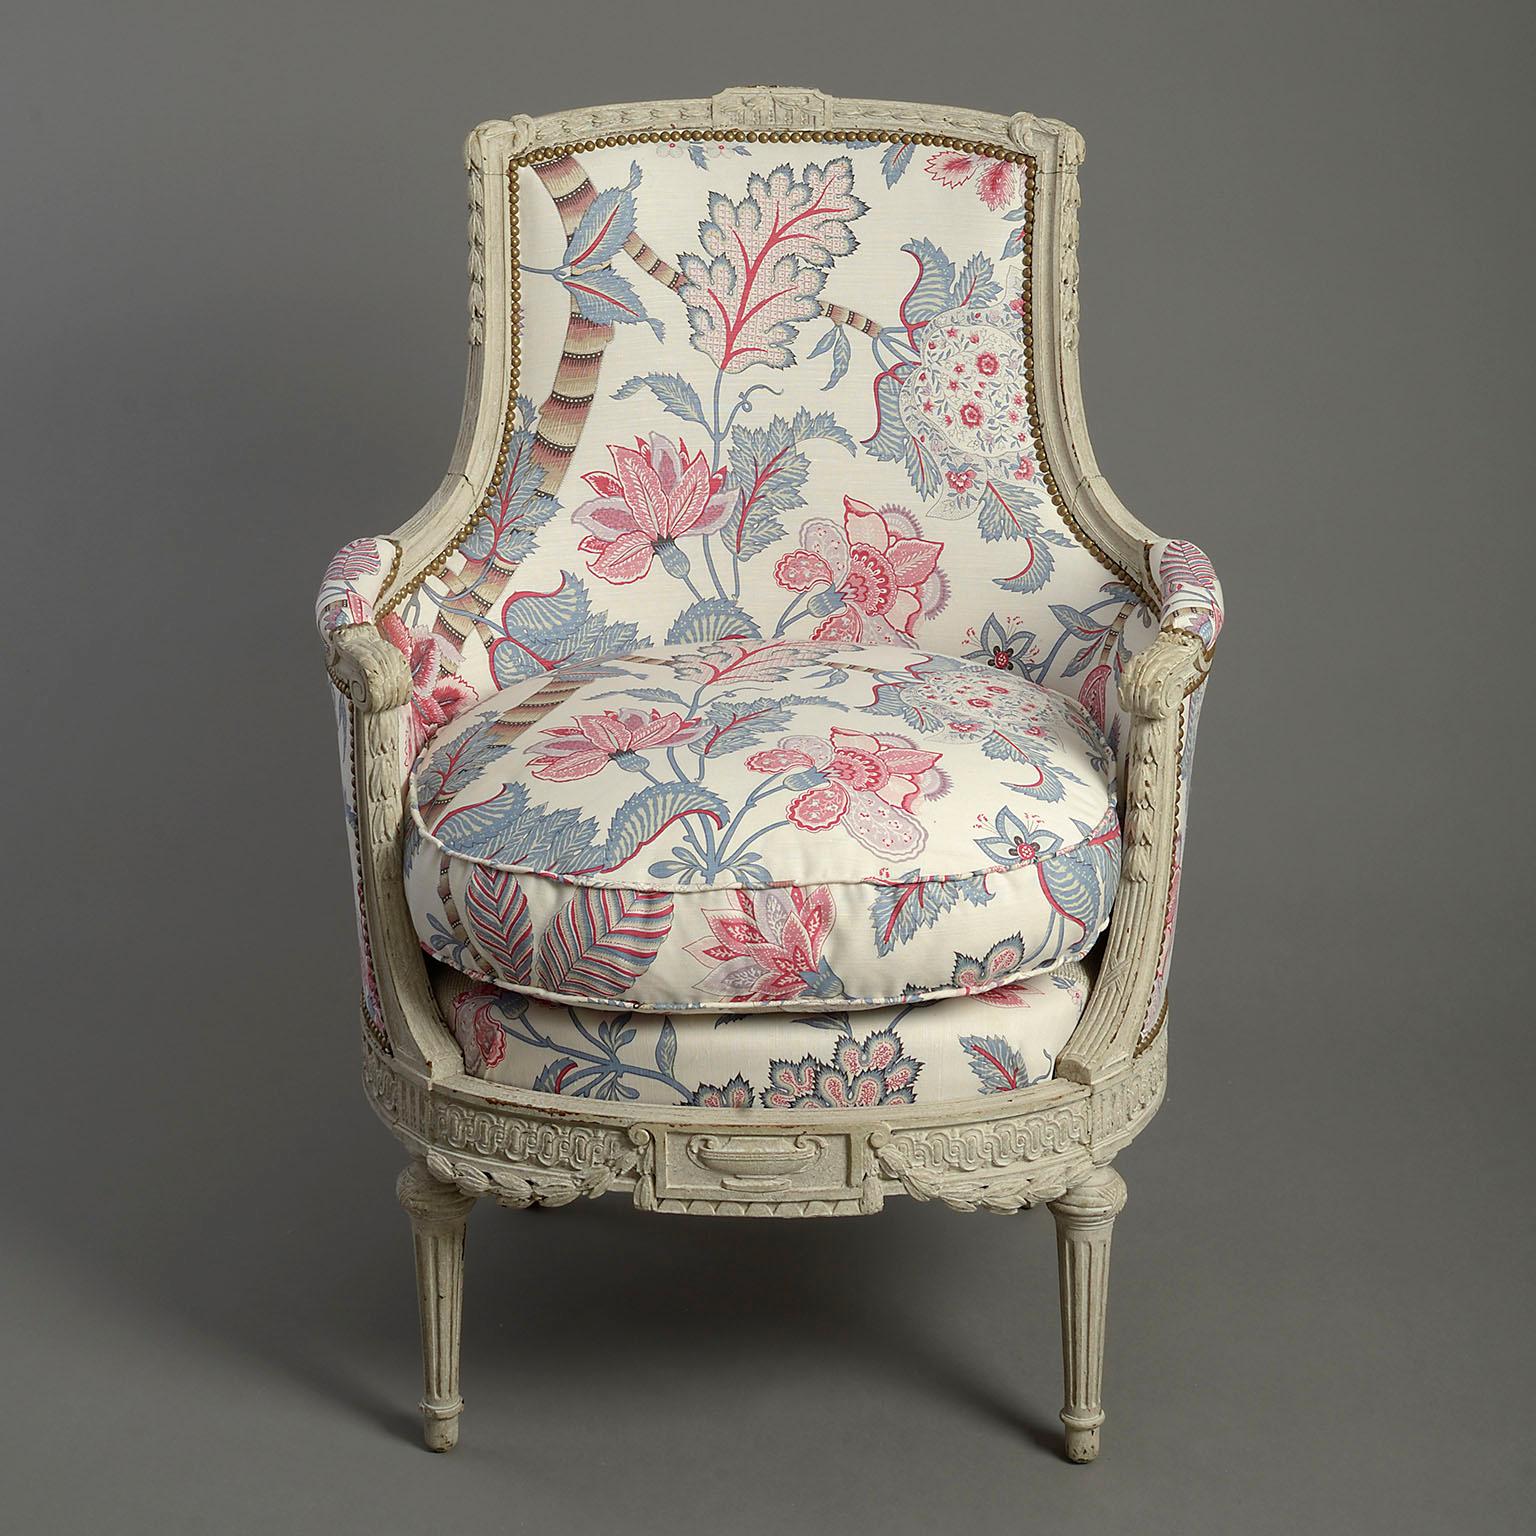 Pair of late nineteenth century richly carved and painted bergere armchairs in the Louis XVI manner. Upholsterd in Banyan Tree oyster linen by Bennison

From a private collection, Paris, France.